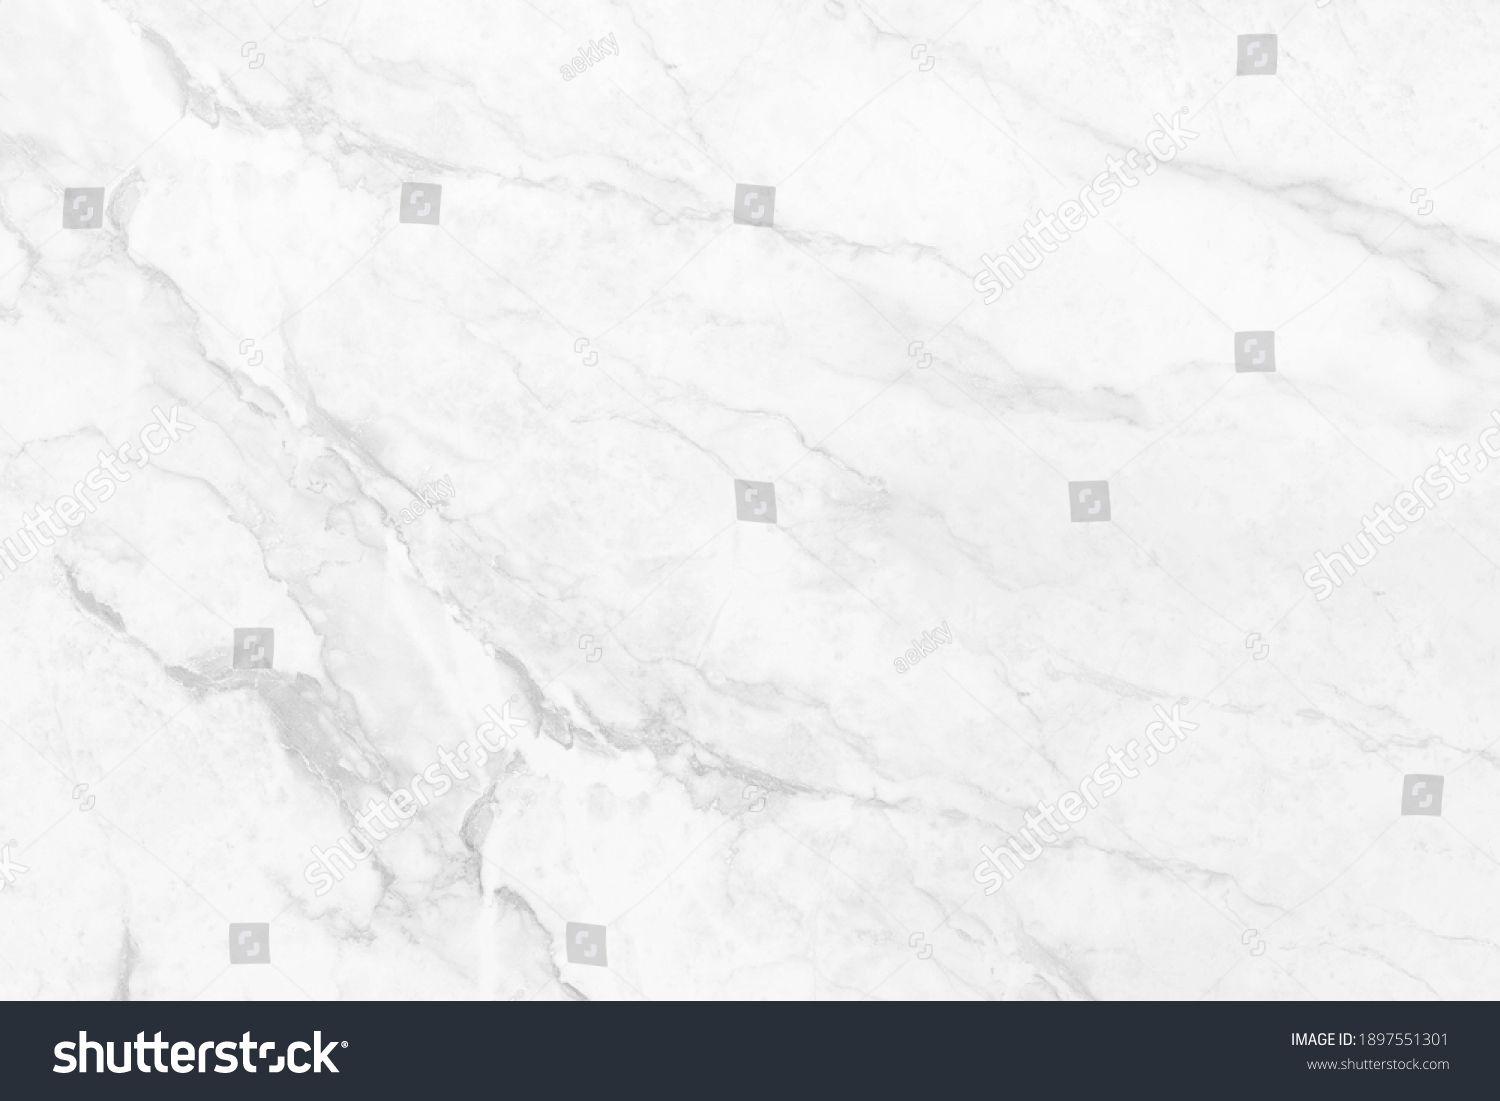 White marble texture background pattern with high resolution. #1897551301